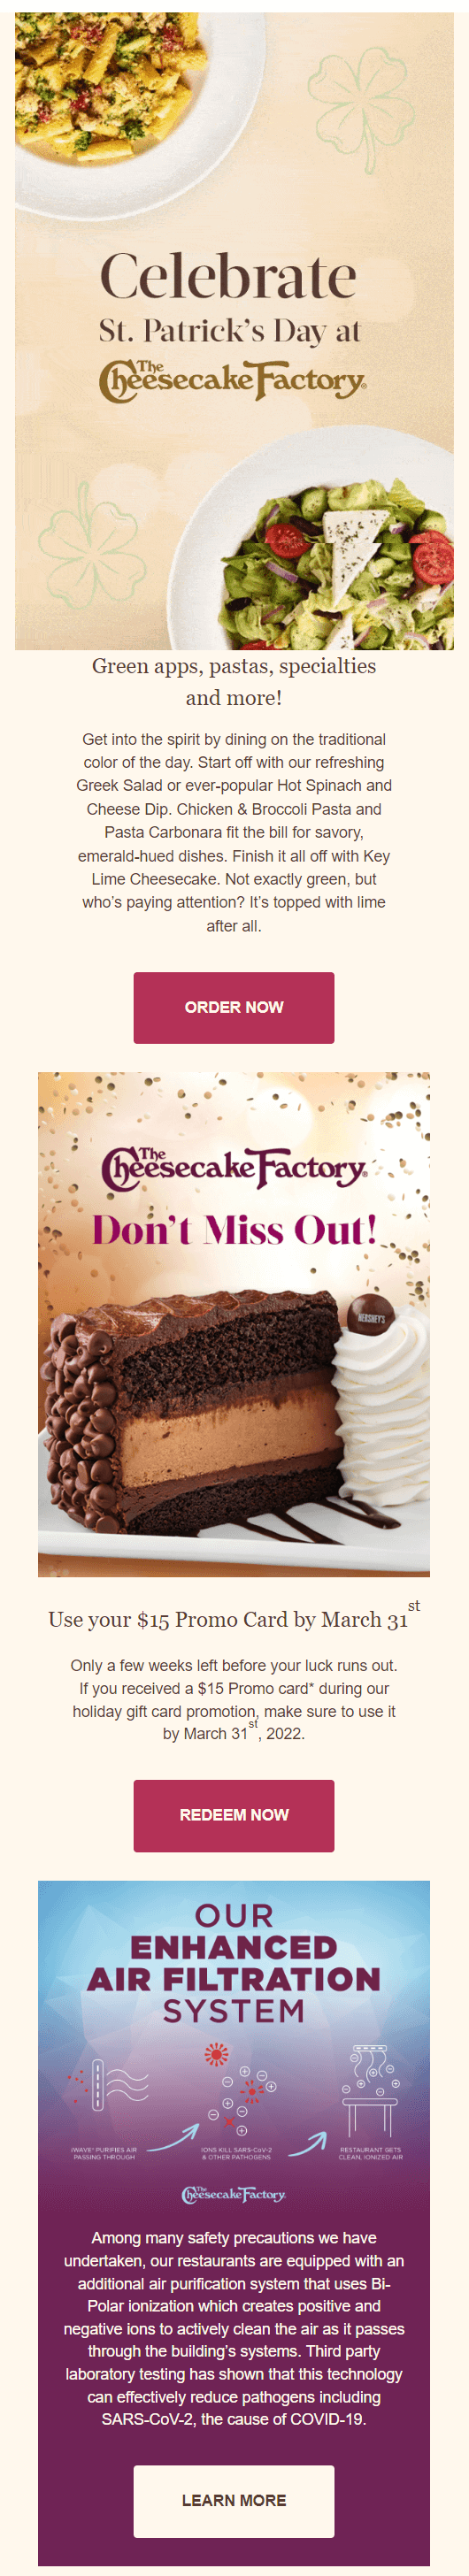 The email campaign by Cheesecake Factory